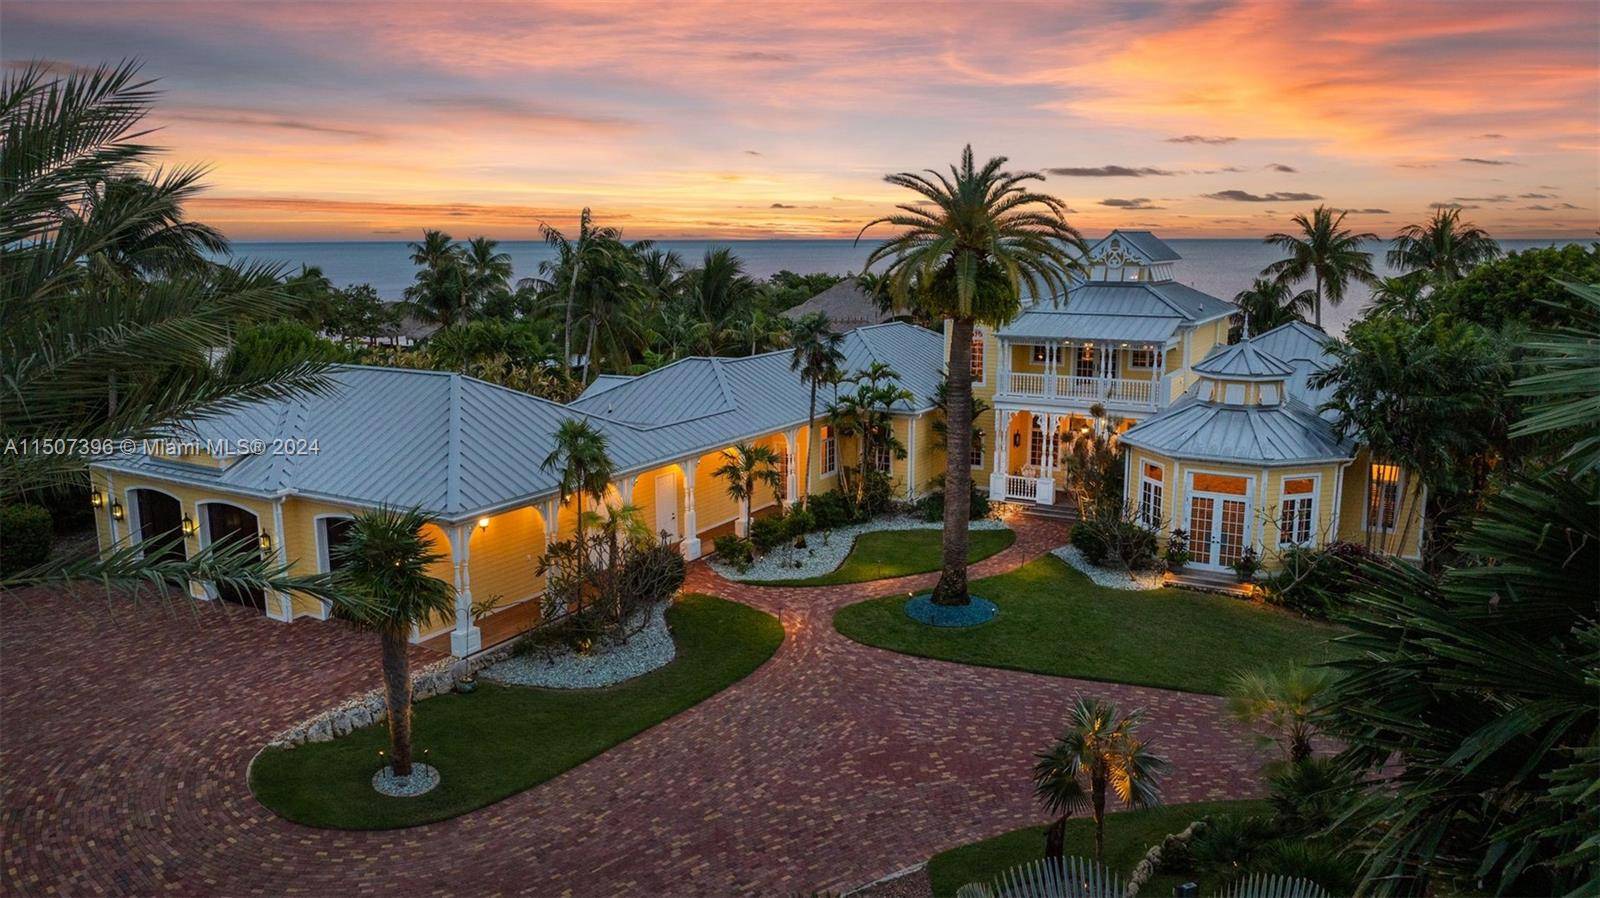 Experience Caribbean island luxury on this five acre oceanfront estate while remaining connected to the mainland.